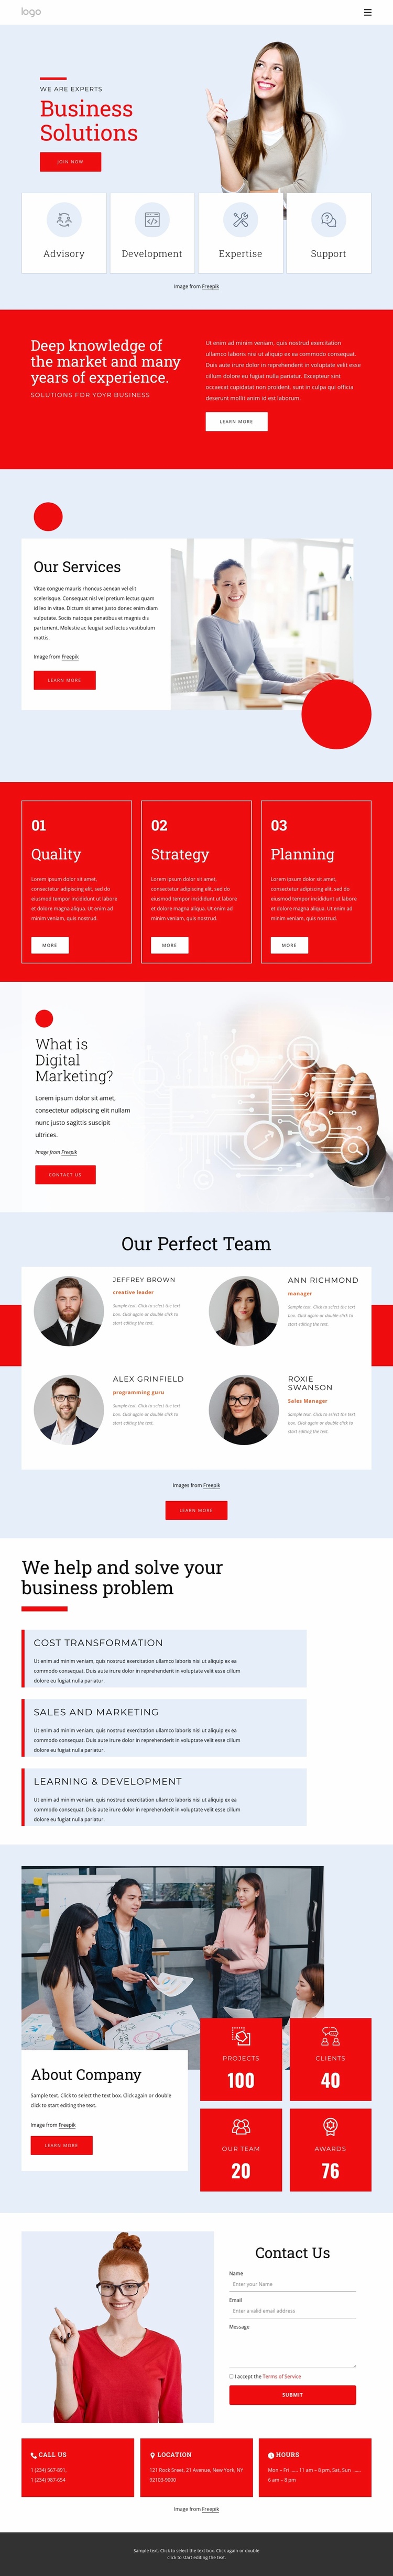 We are experts in business solutions Website Template